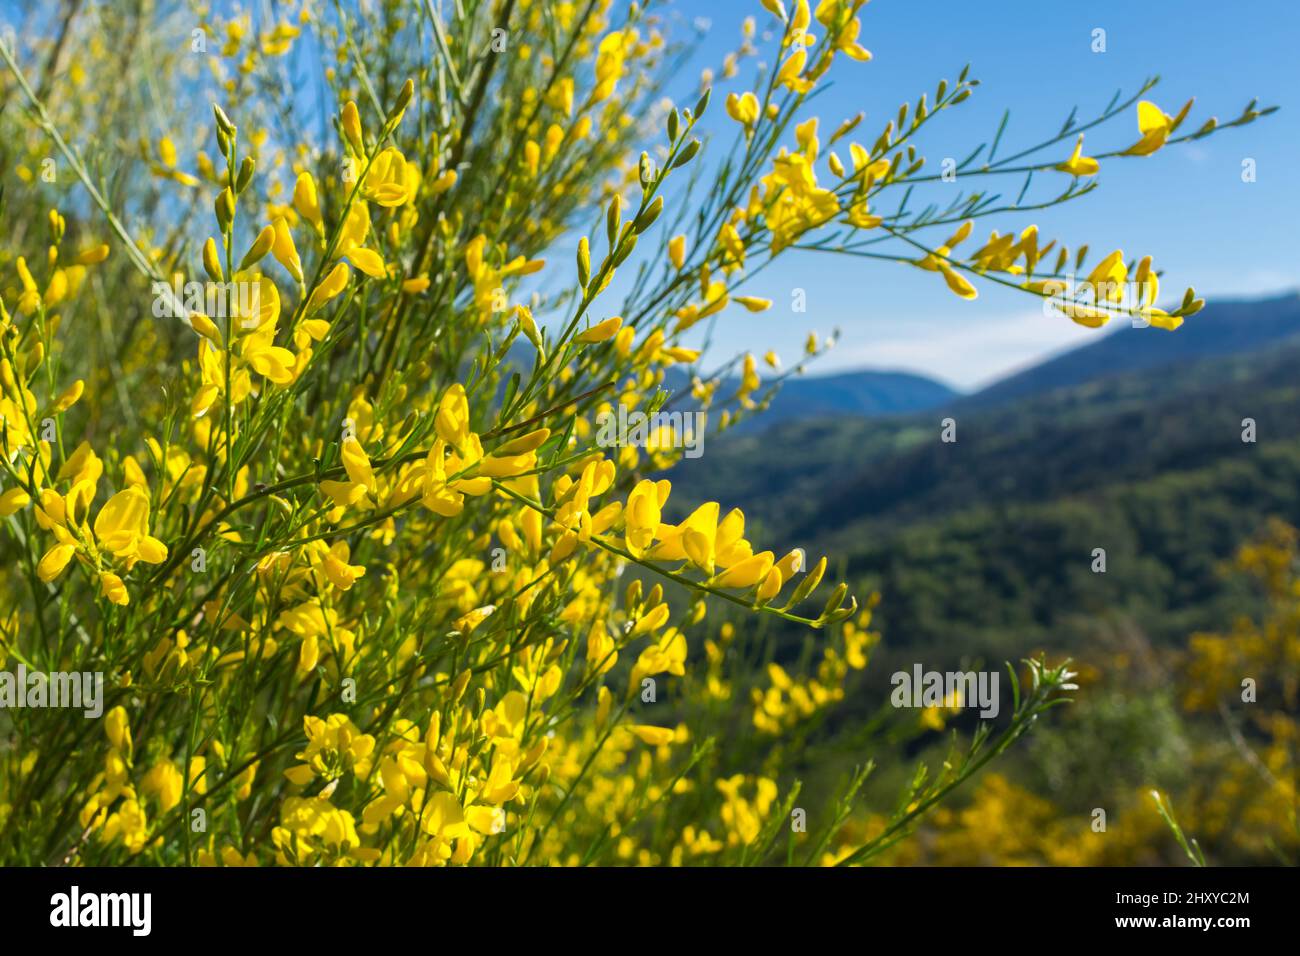 Yellow flowers of retama in the foreground with mountains in the background. Cytisus scoparius Stock Photo